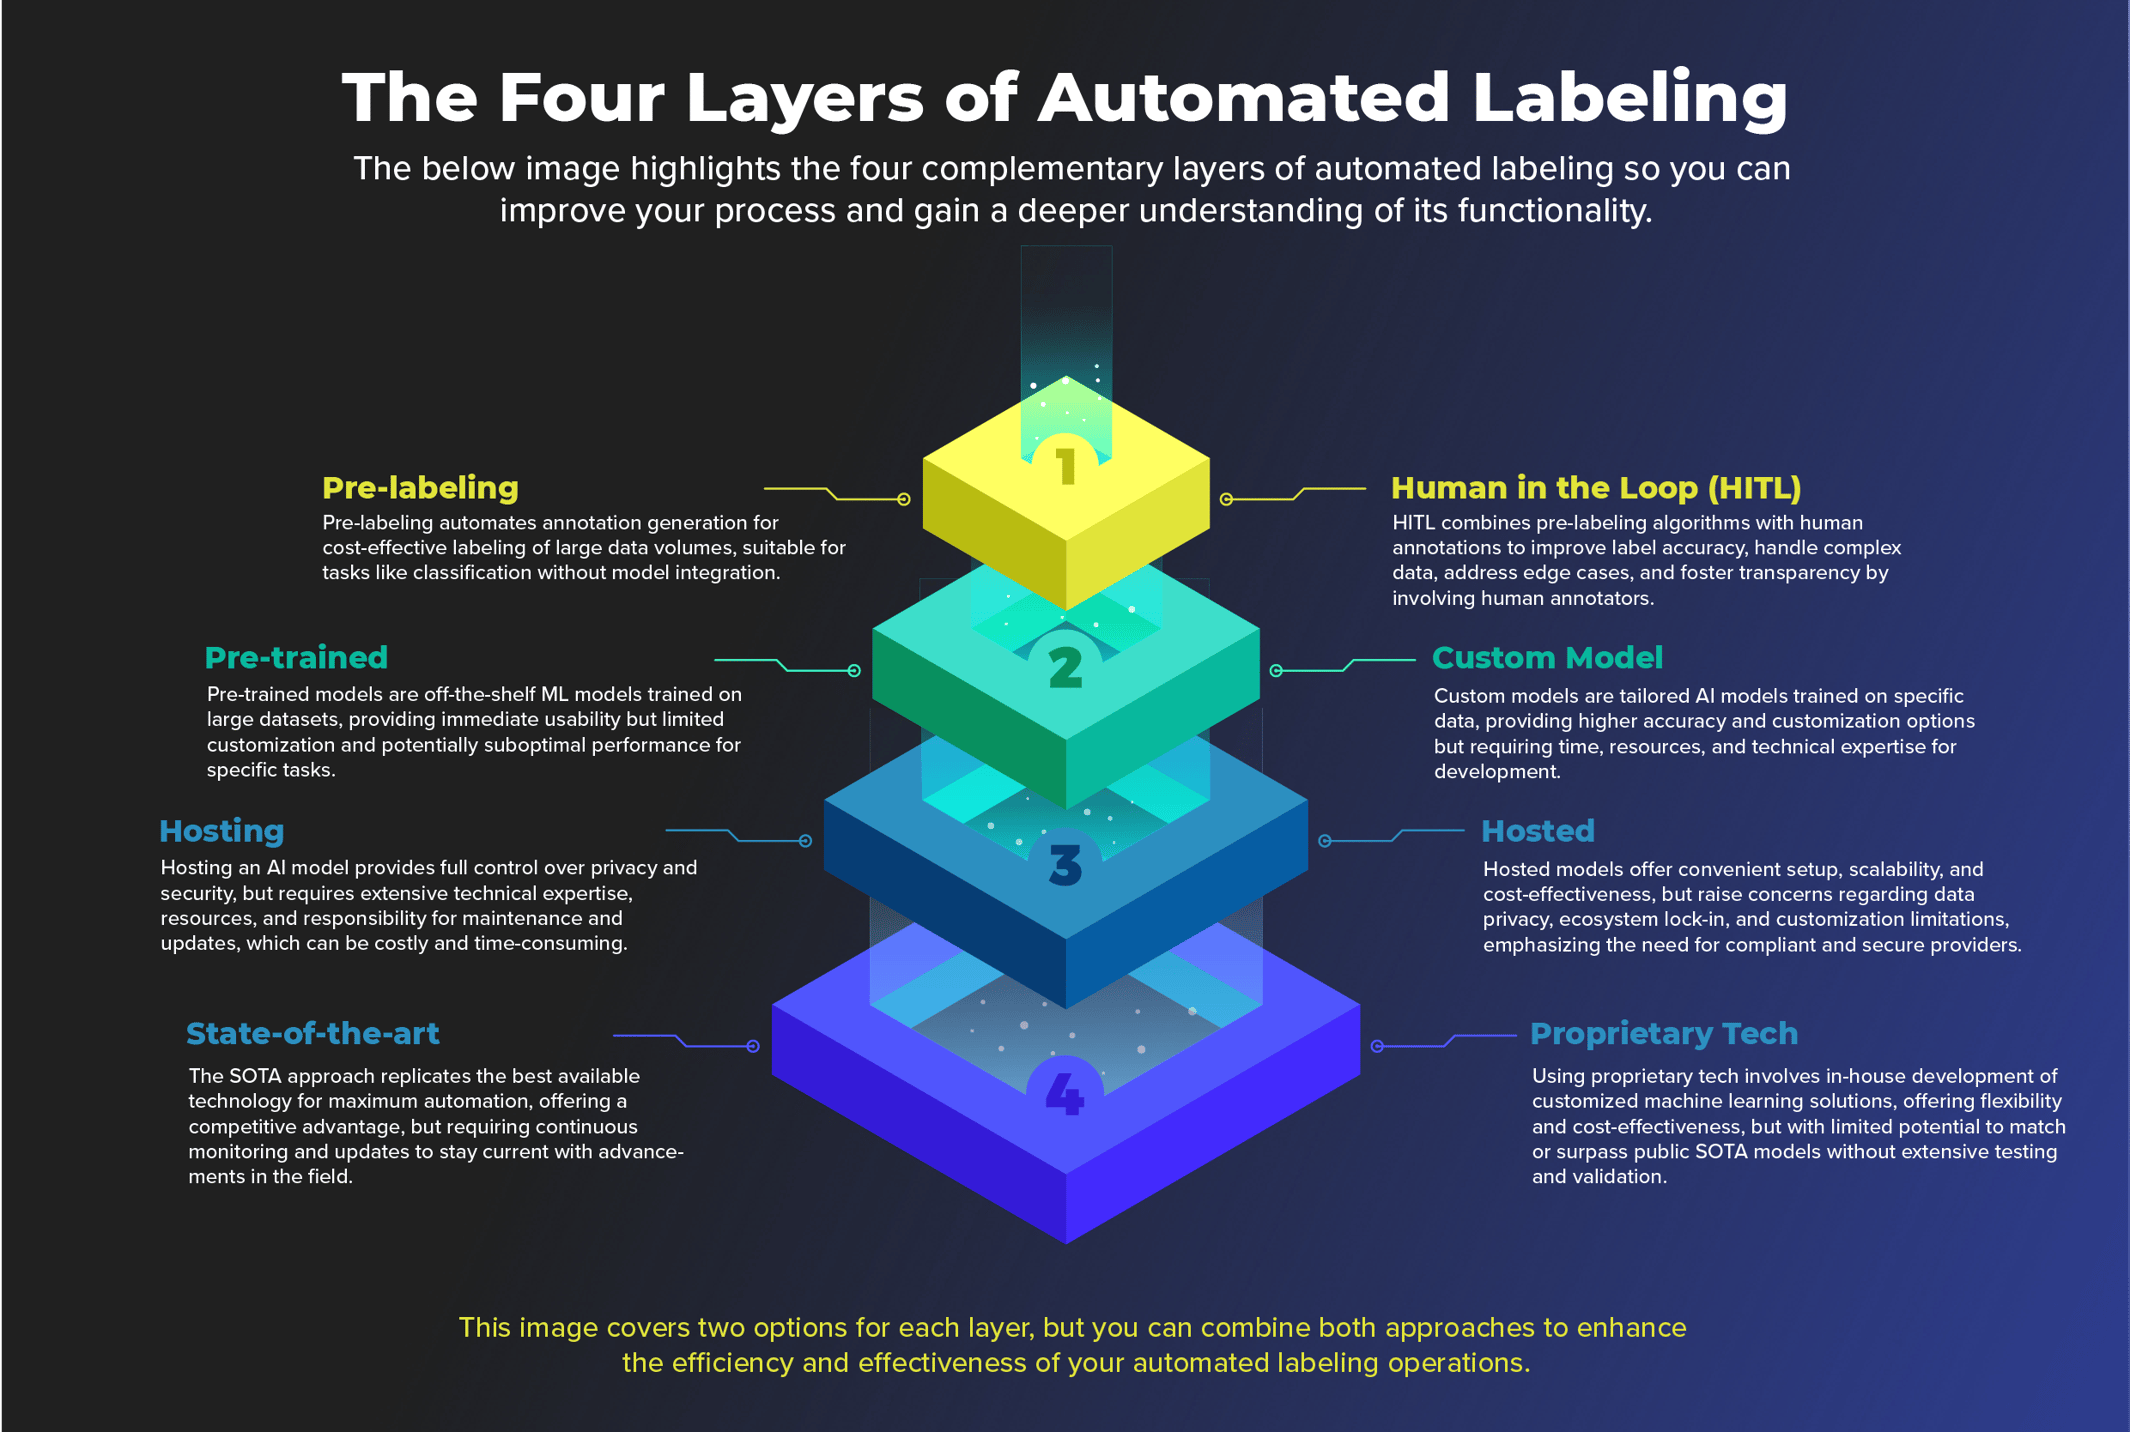 This image depicts the four layers of automated data labeling designed to improve the accuracy and efficiency of your AI models.